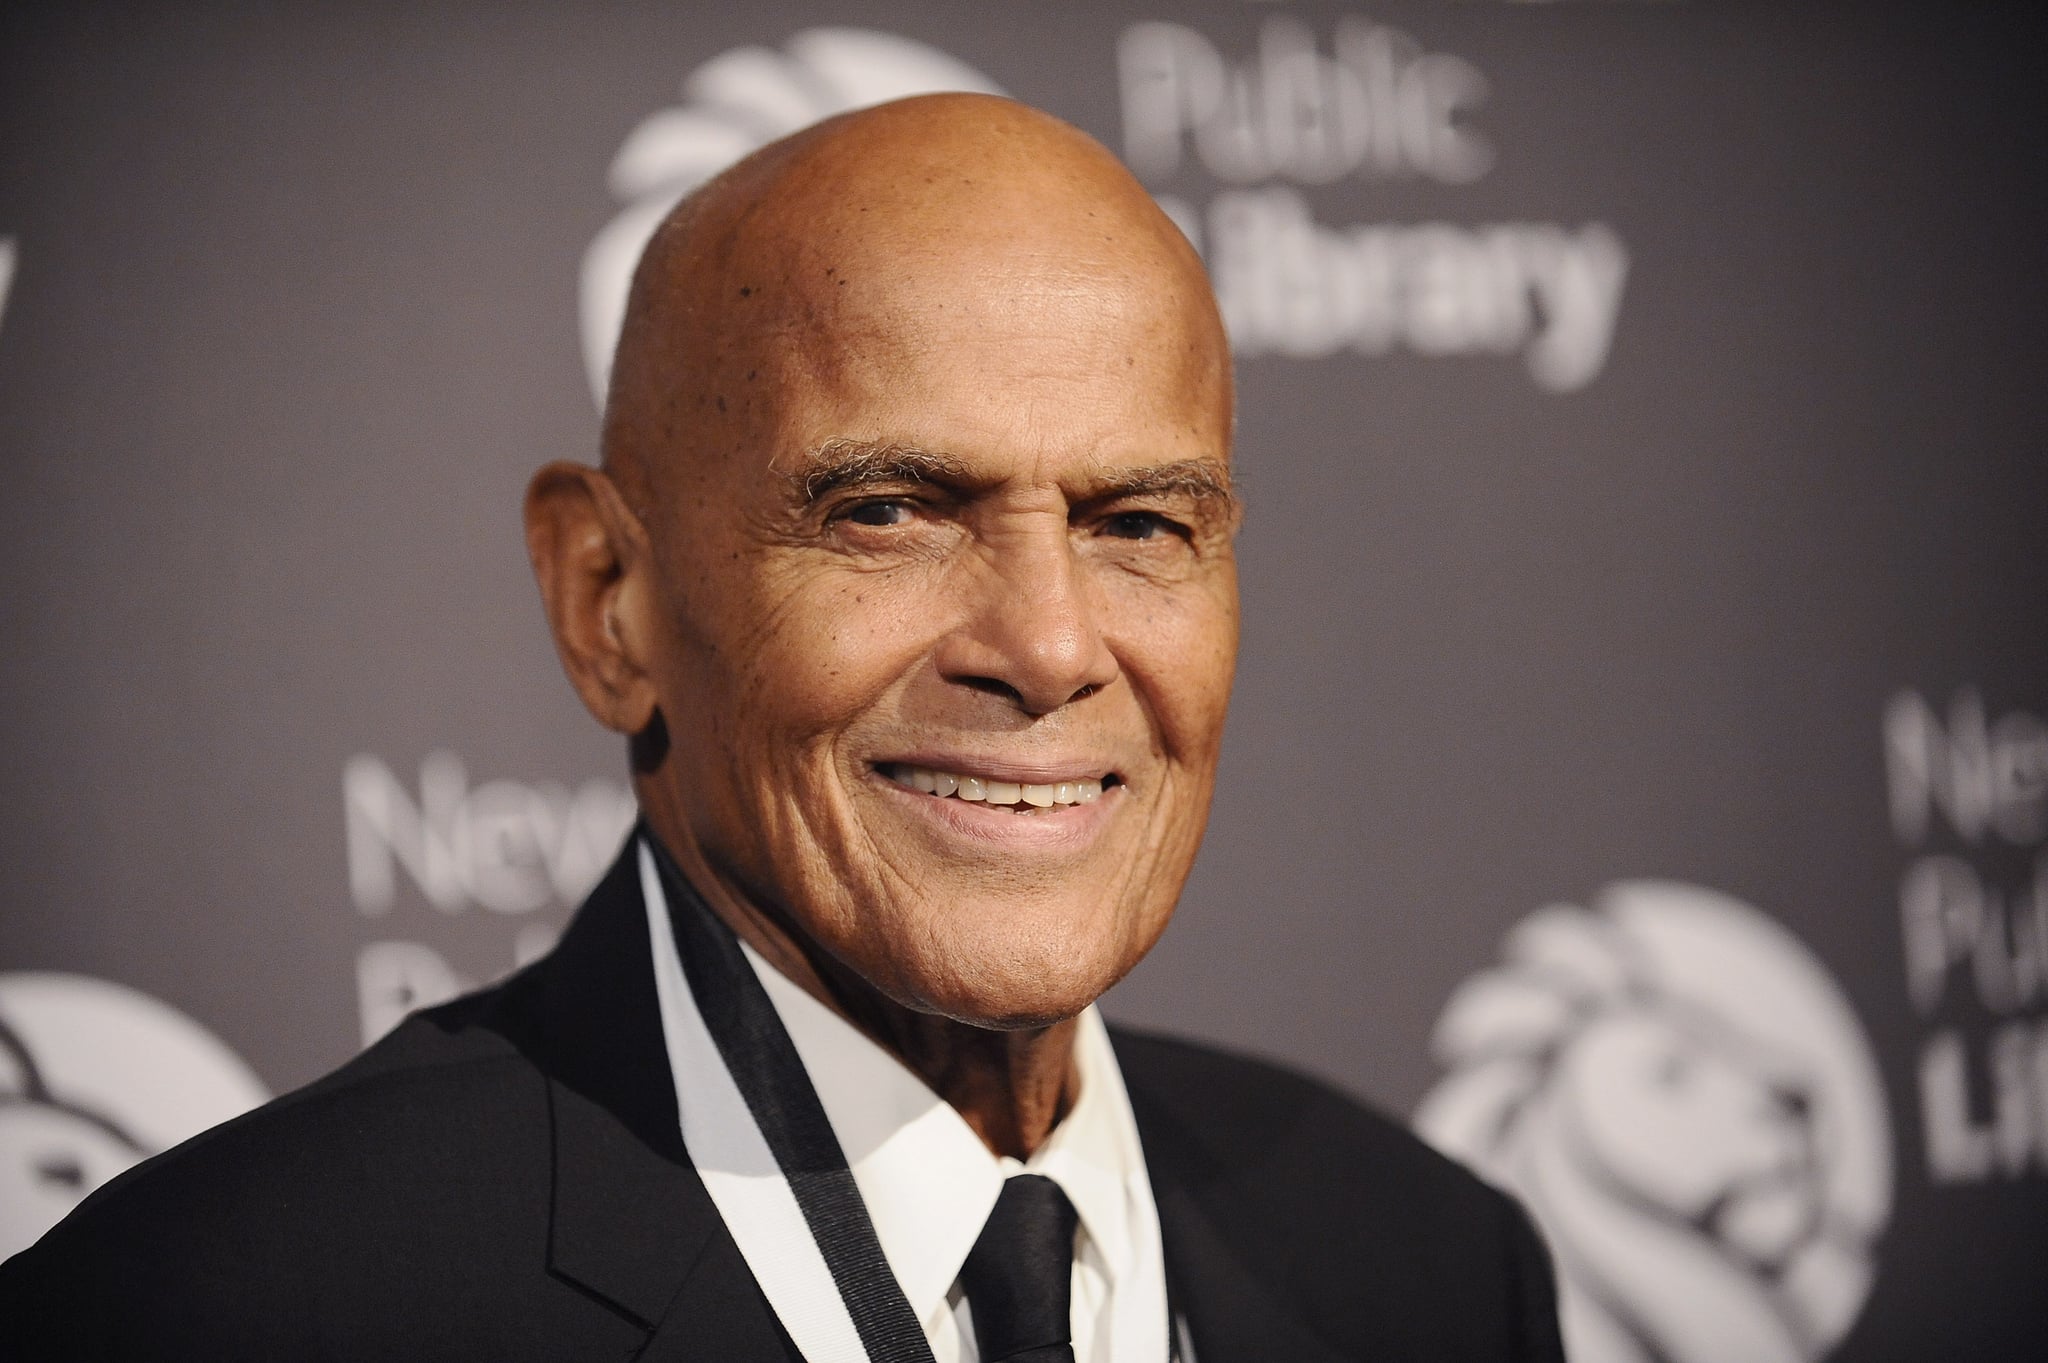 NEW YORK, NY - NOVEMBER 07:  Event honouree Harry Belafonte attends the 2016 Library Lions gala at New York Public Library - Stephen A Schwartzman Building on November 7, 2016 in New York City.  (Photo by Gary Gershoff/WireImage)